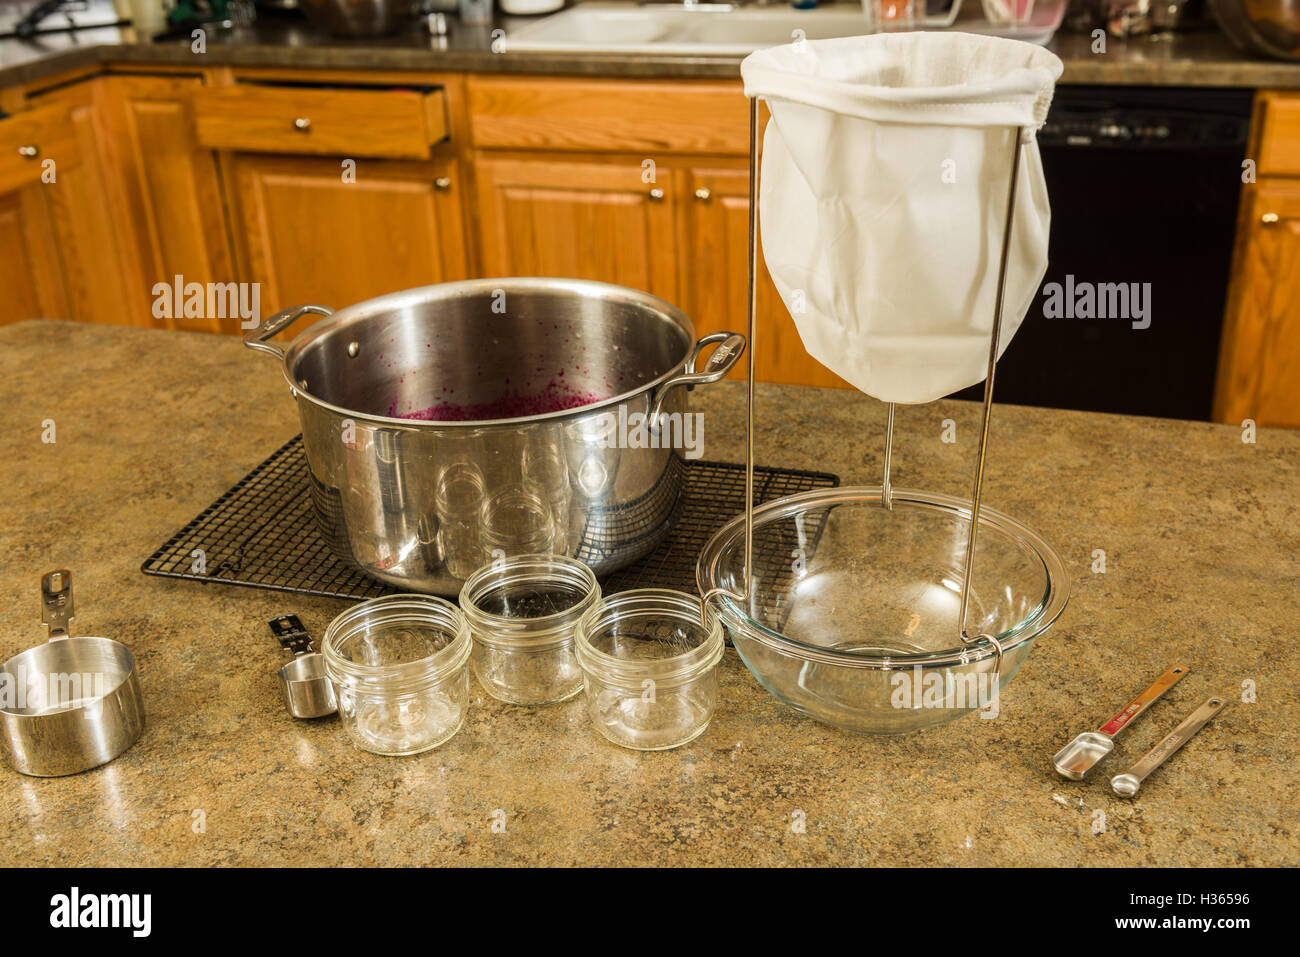 Items needed to make homemade jelly or jam at home.  Strainer, bowl, measuring cups, and kettle Stock Photo